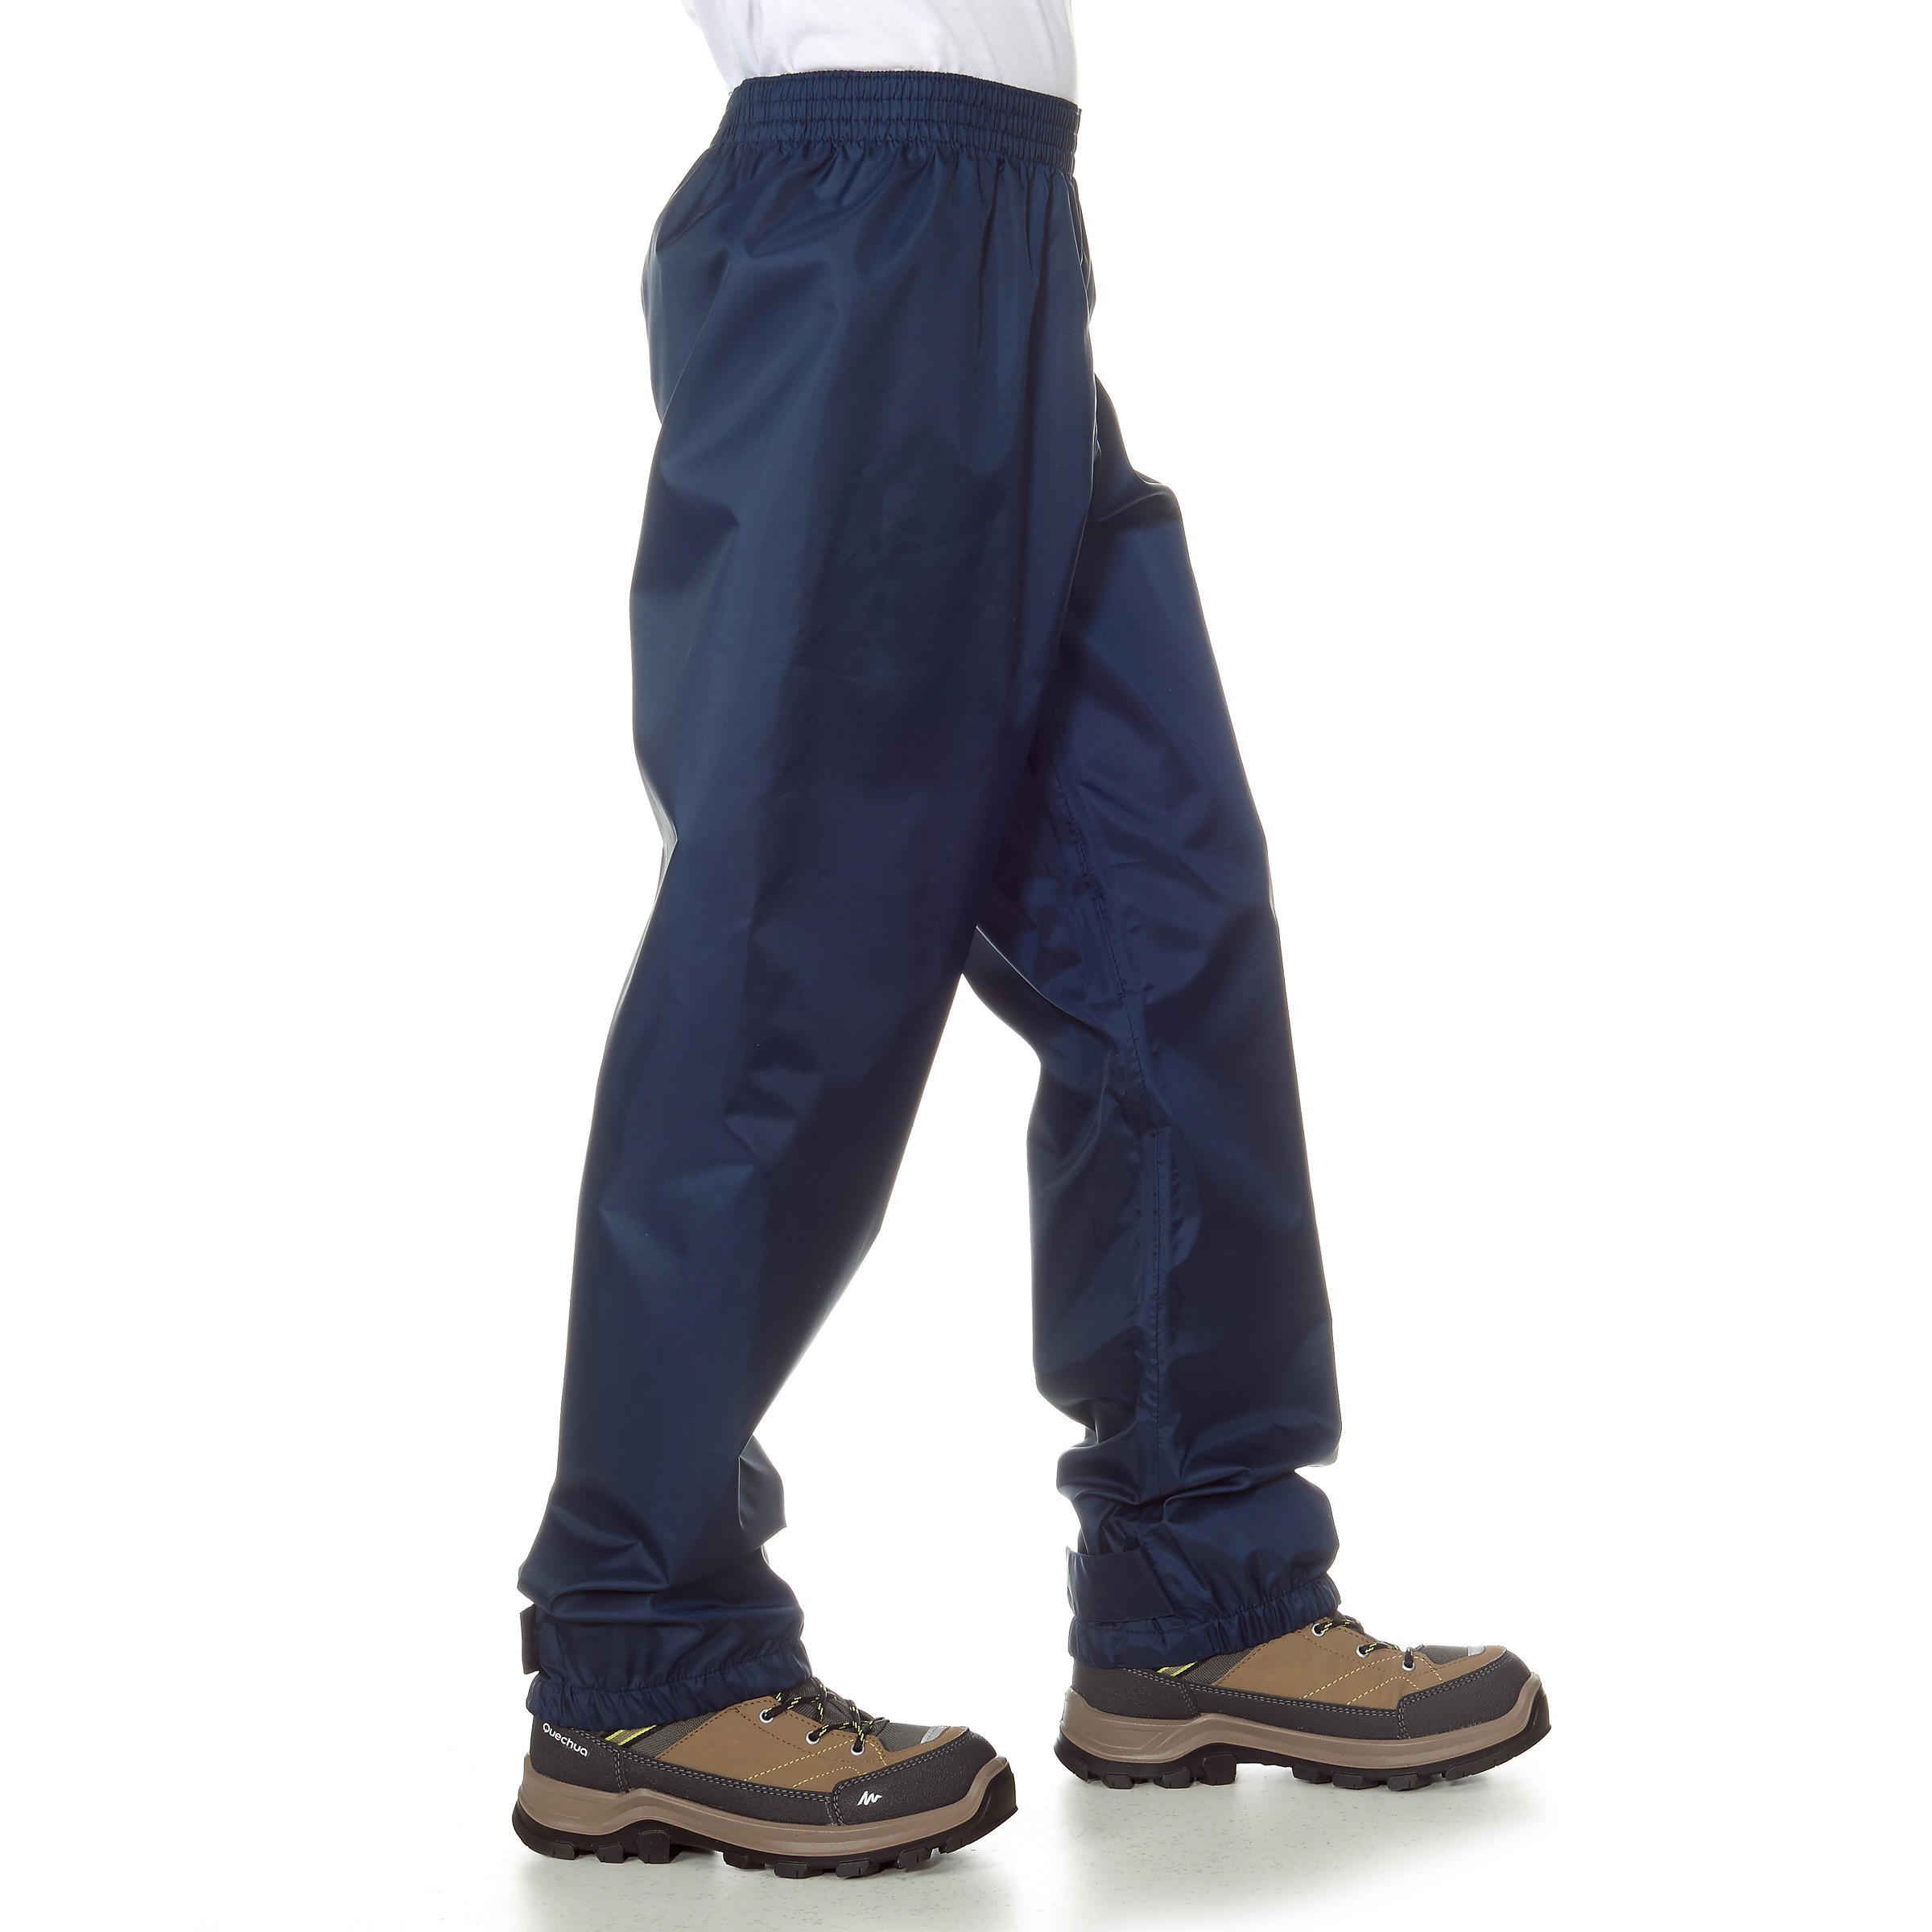 Kids' Hiking Waterproof Overtrousers MH100 2-6 Years 5/9